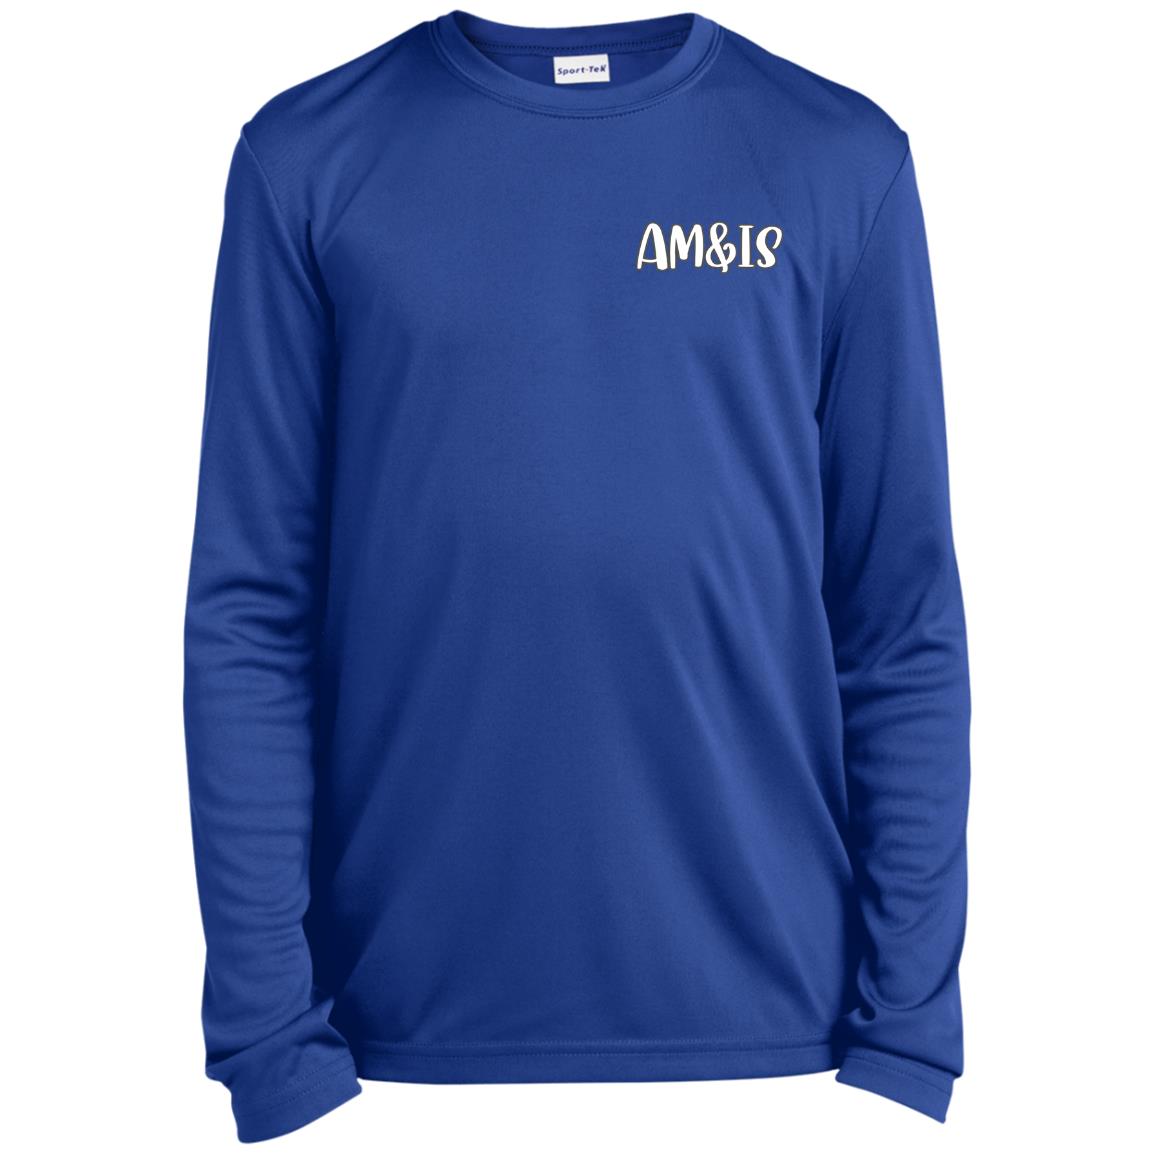 TRUE ROYAL AM&IS Activewear Youth Long Sleeve Performance Tee - kid's t-shirts at TFC&H Co.